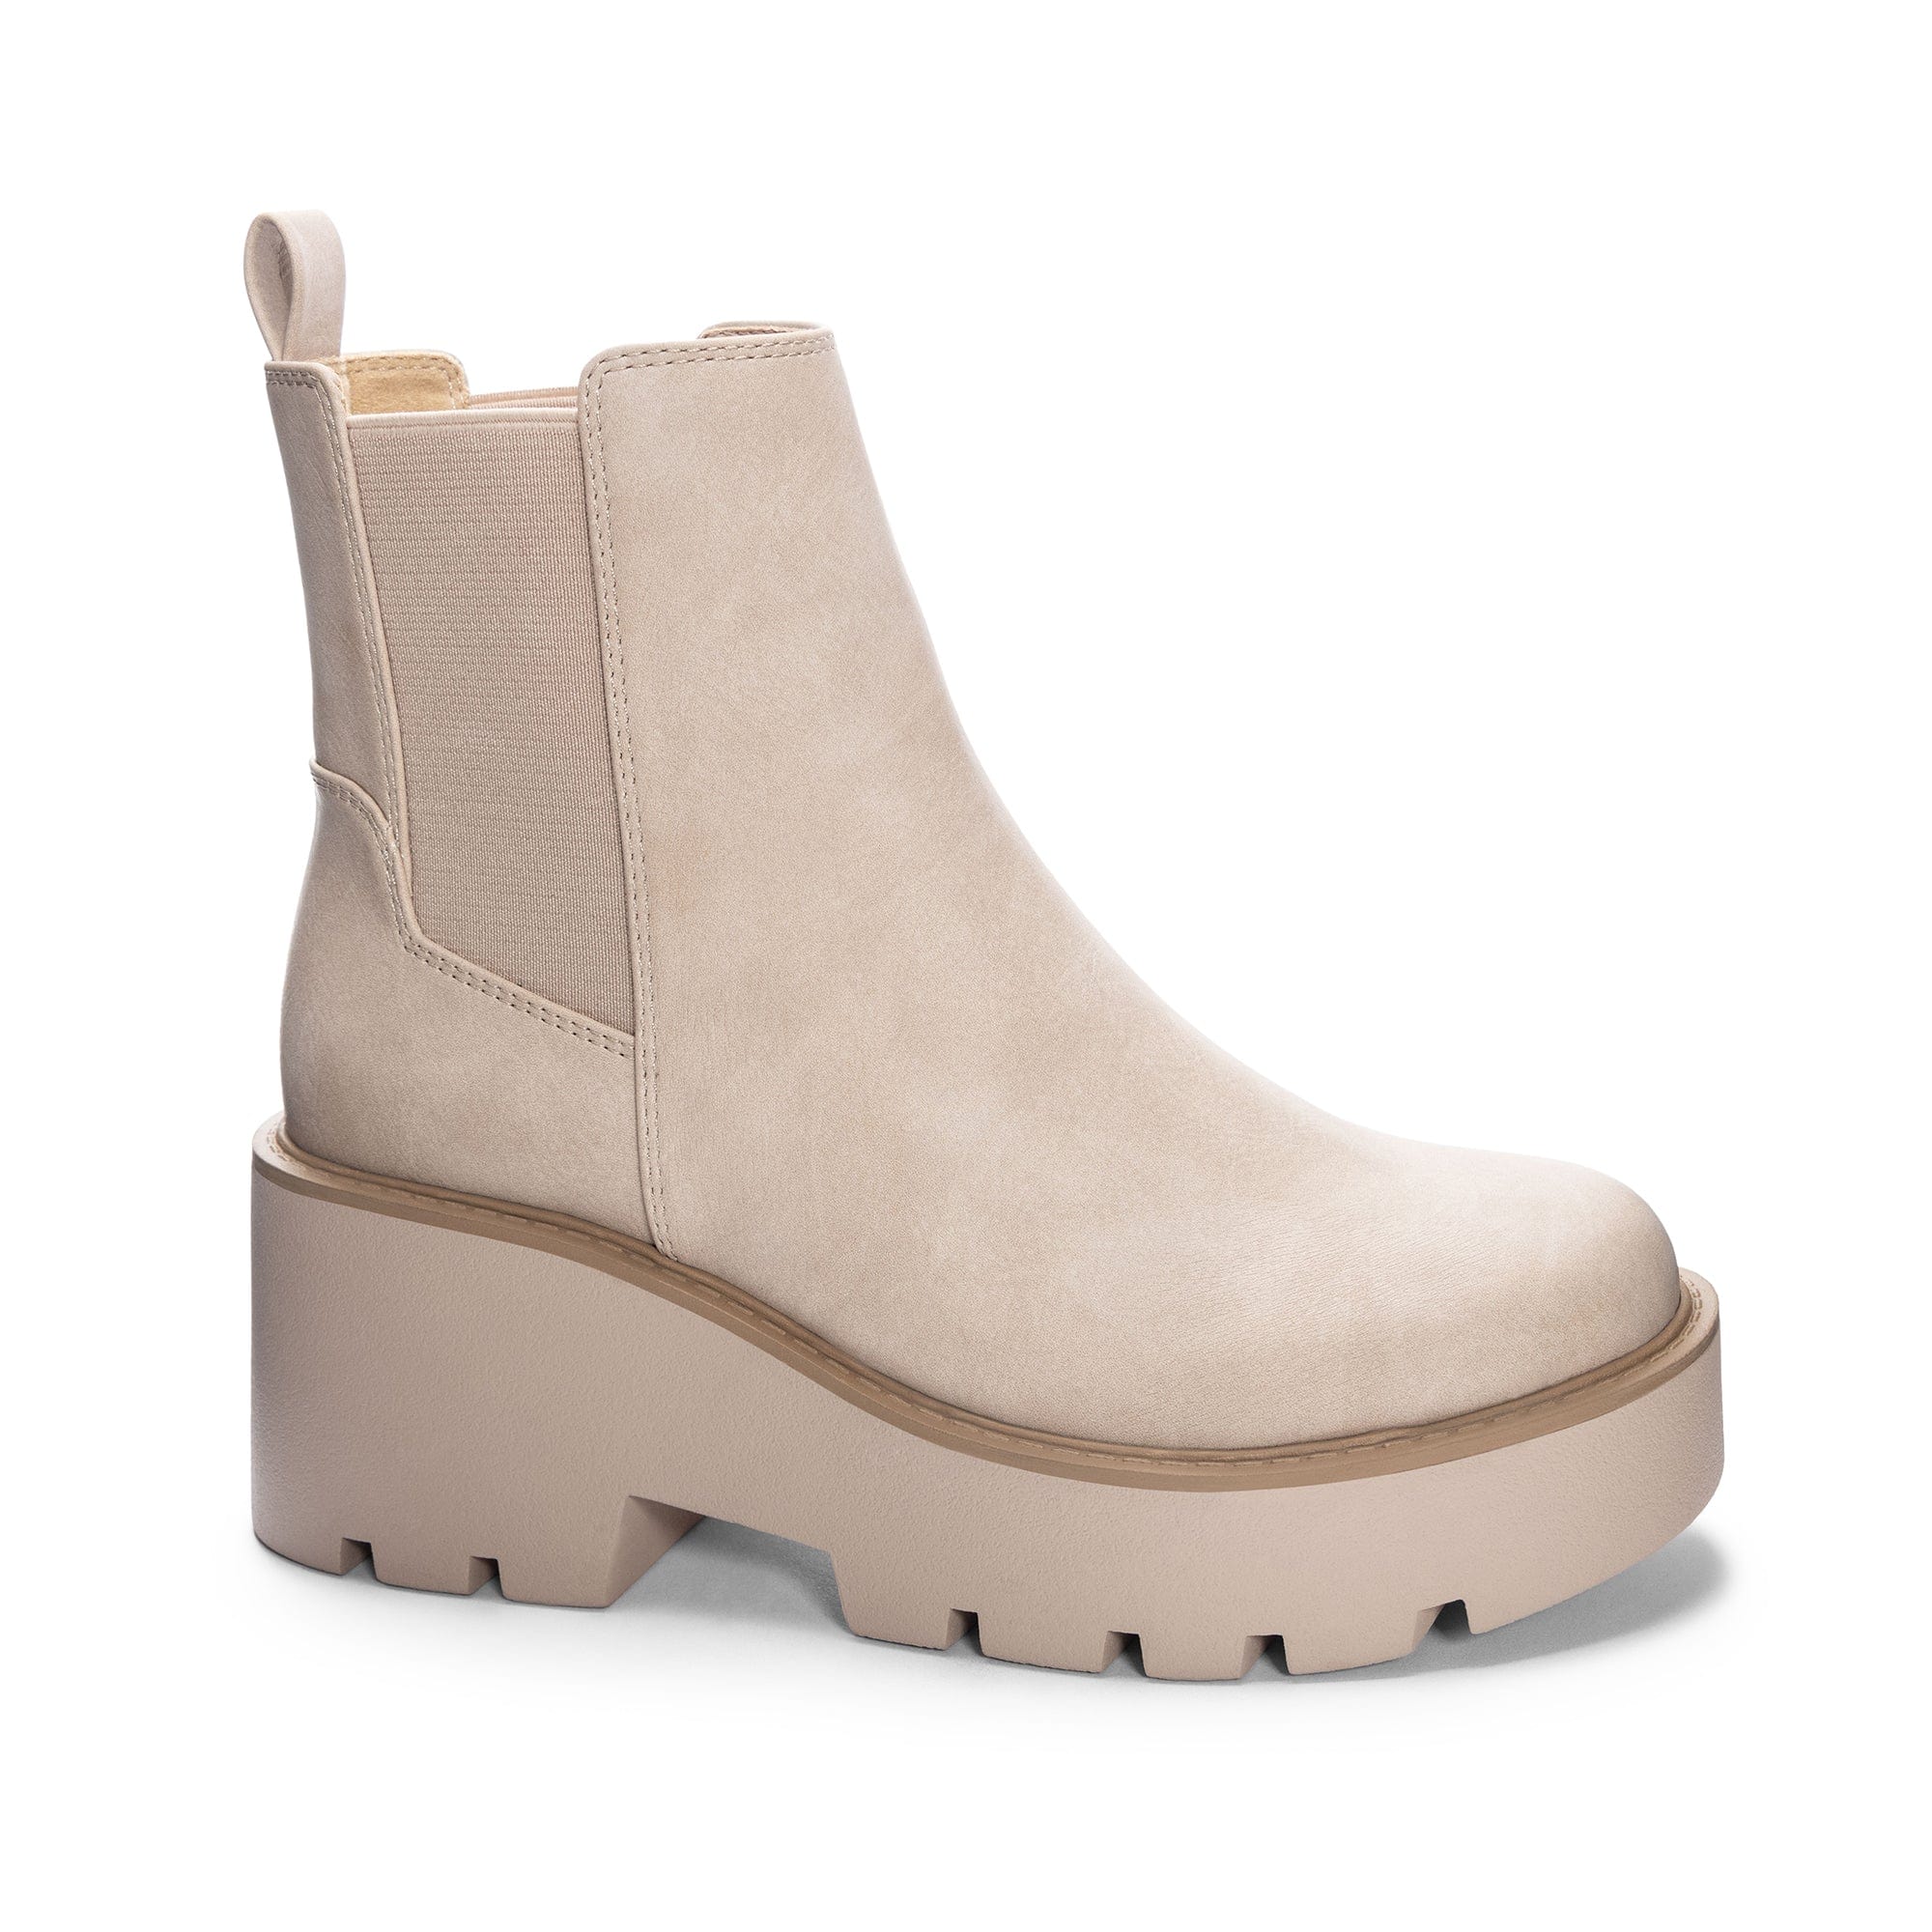 Dirty Laundry Rabbit Casual Bootie-Taupe - Infinity Raine